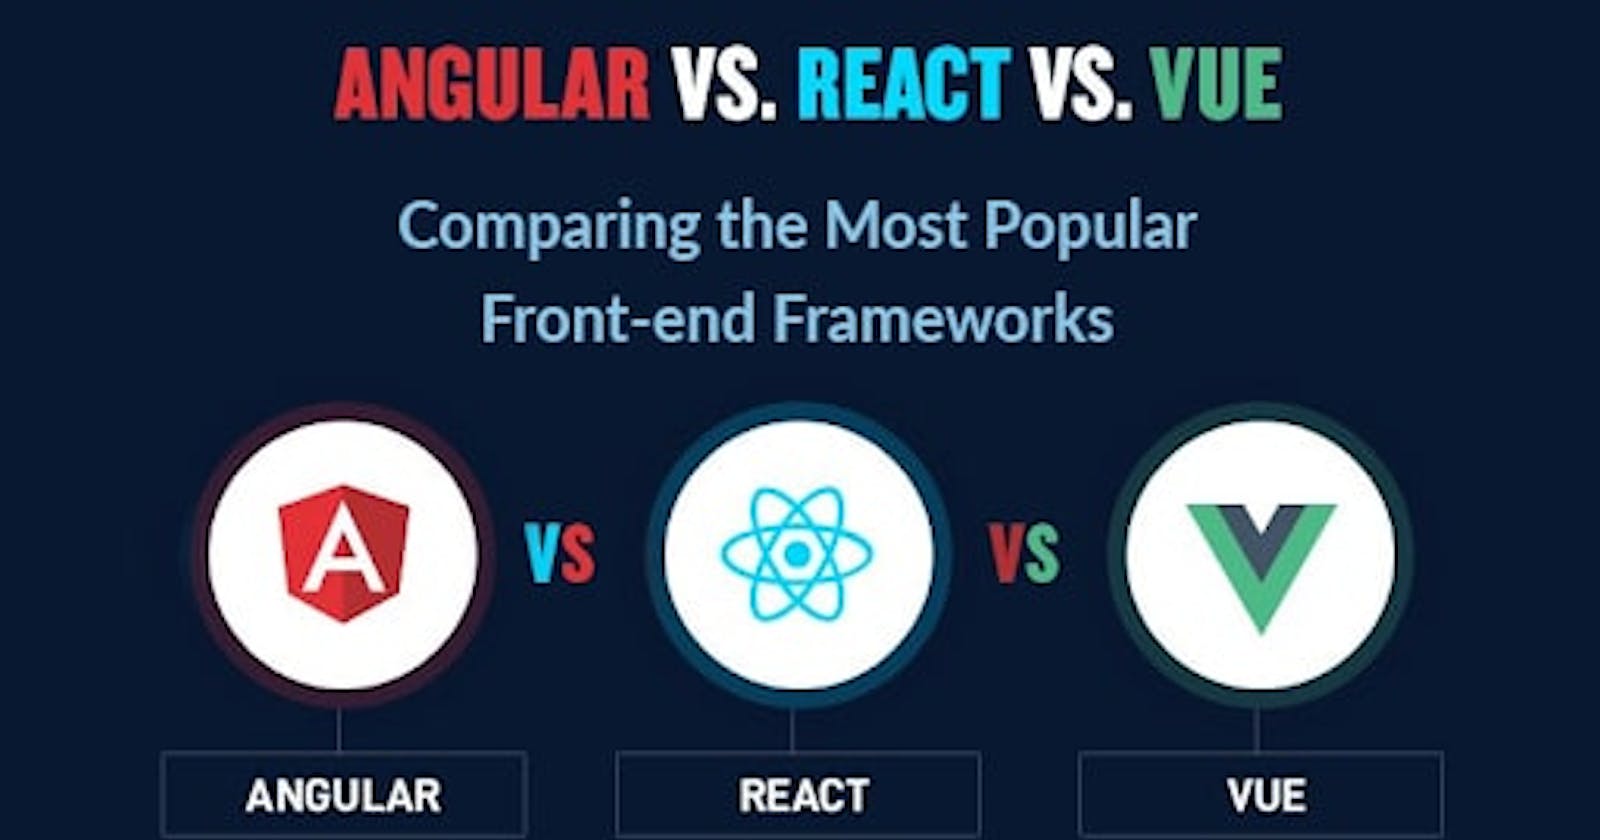 Angular vs React vs Vue: Comparing the Most Popular Front-end Frameworks